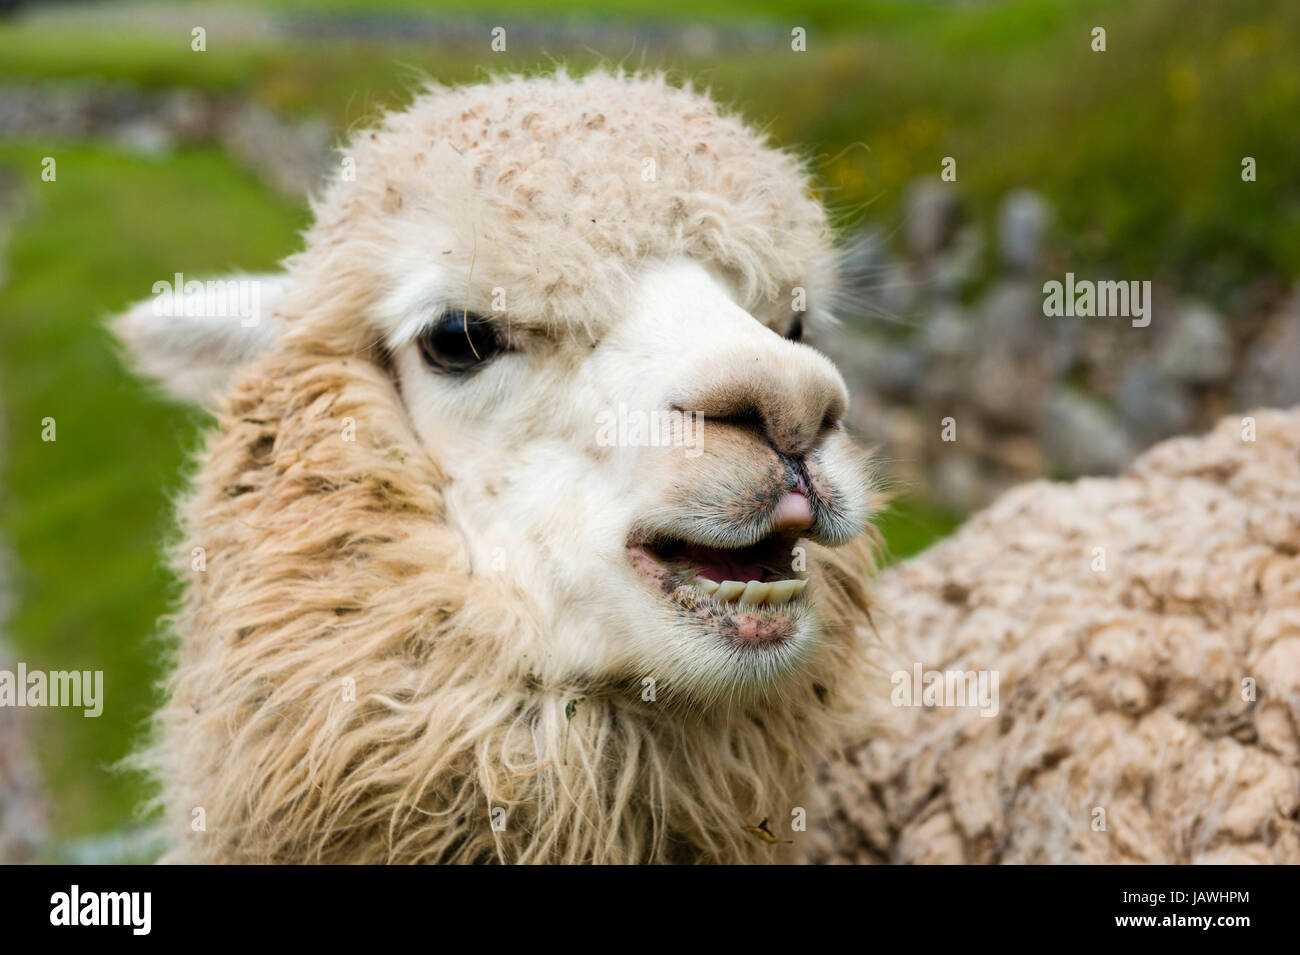 The teeth, muzzle and nostrils of a Lama in the ancient ruins of an Inca citadel. Stock Photo